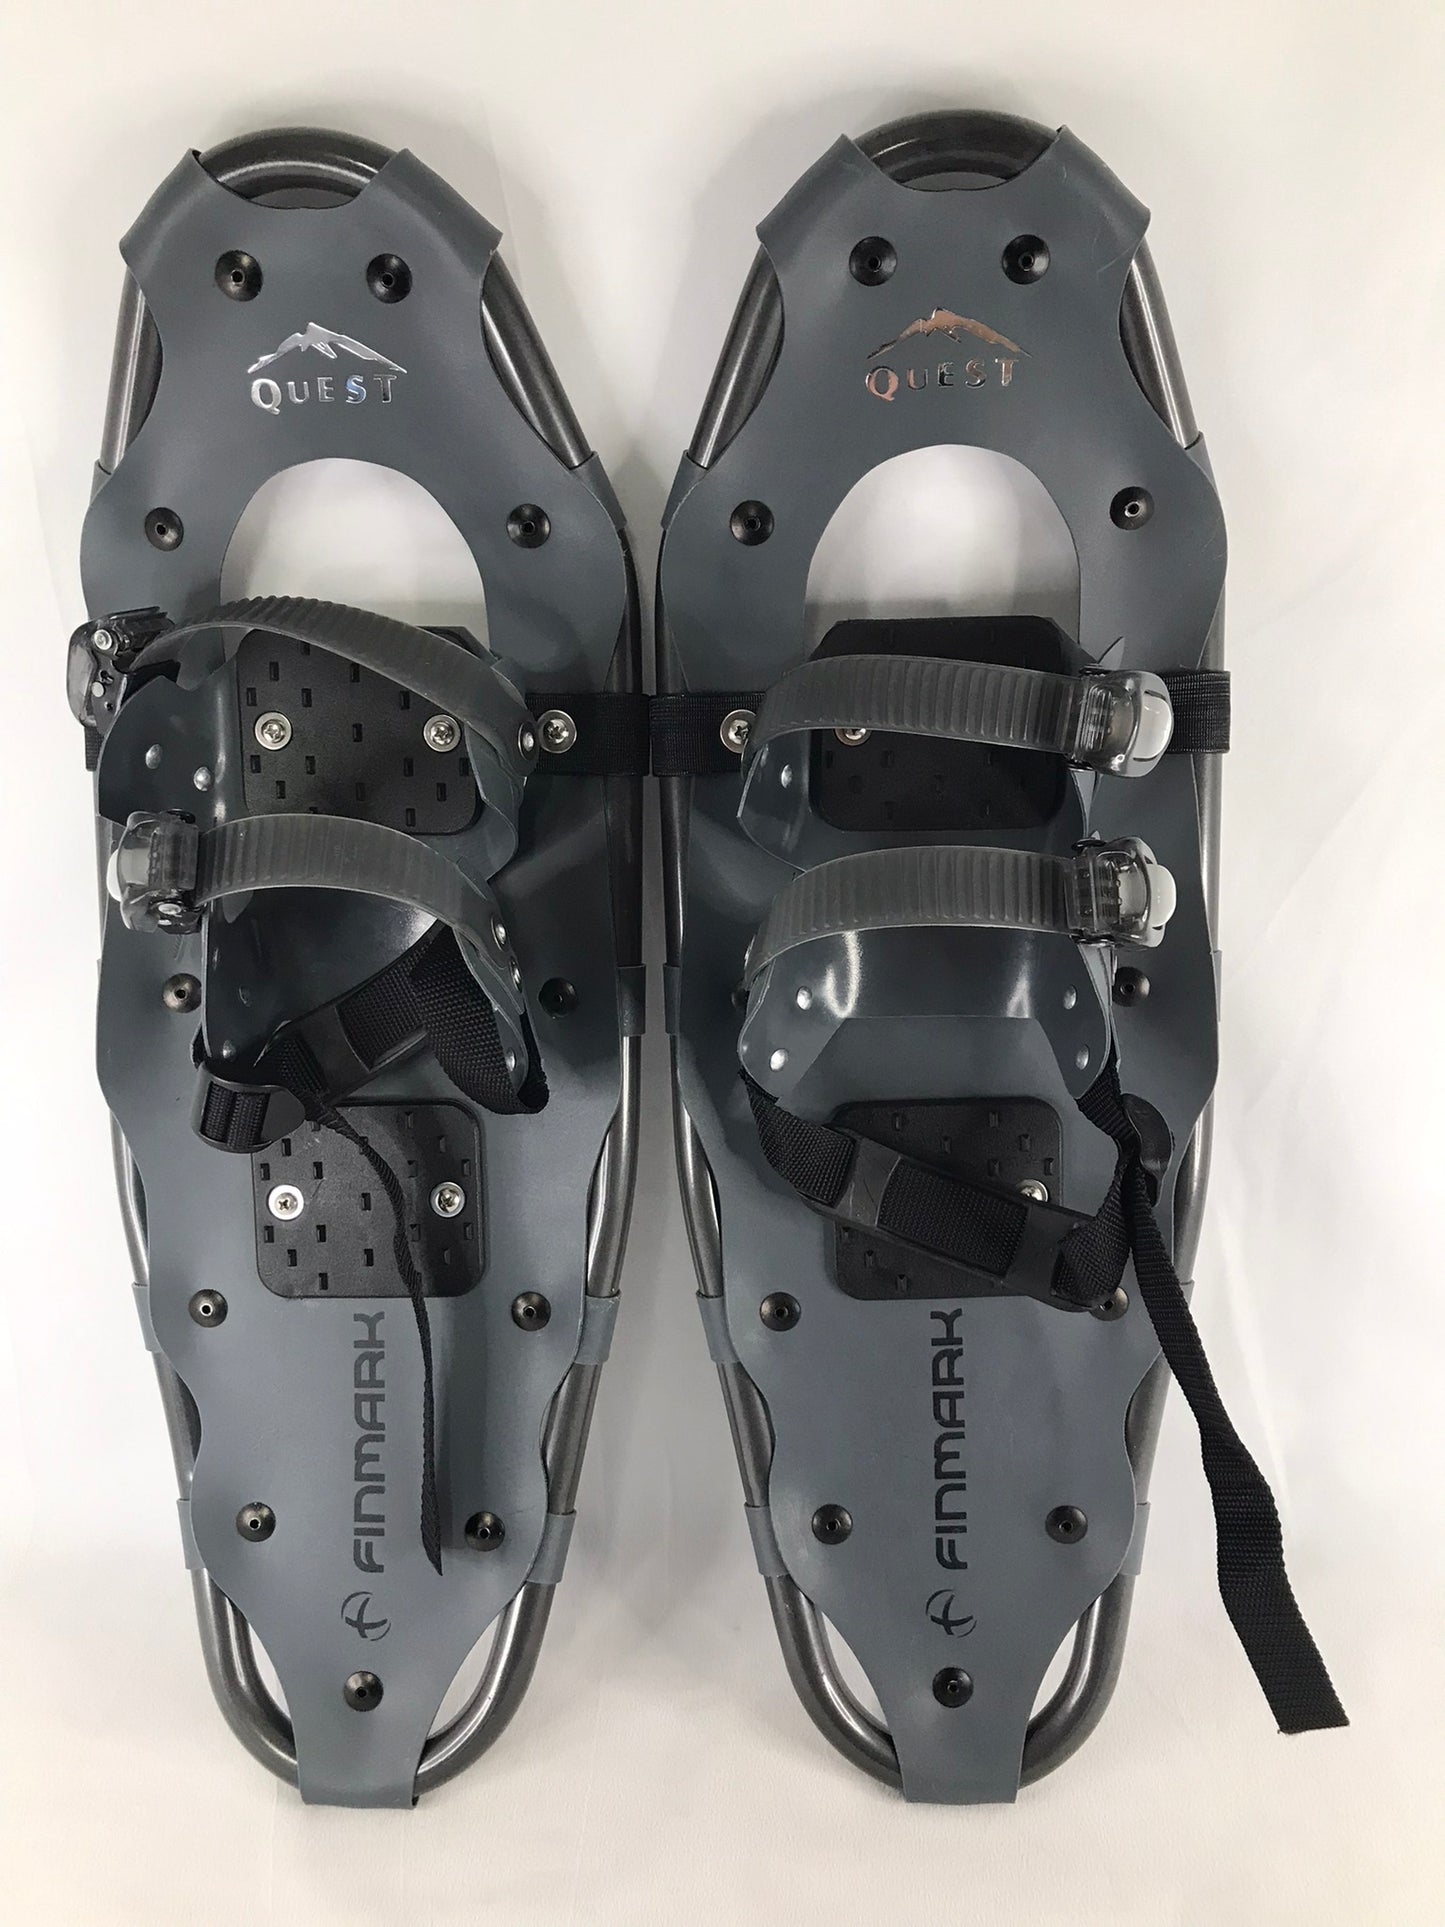 Snowshoes Adult Size 25 inch Up To 175 Lb Quest Grey New Demo Model